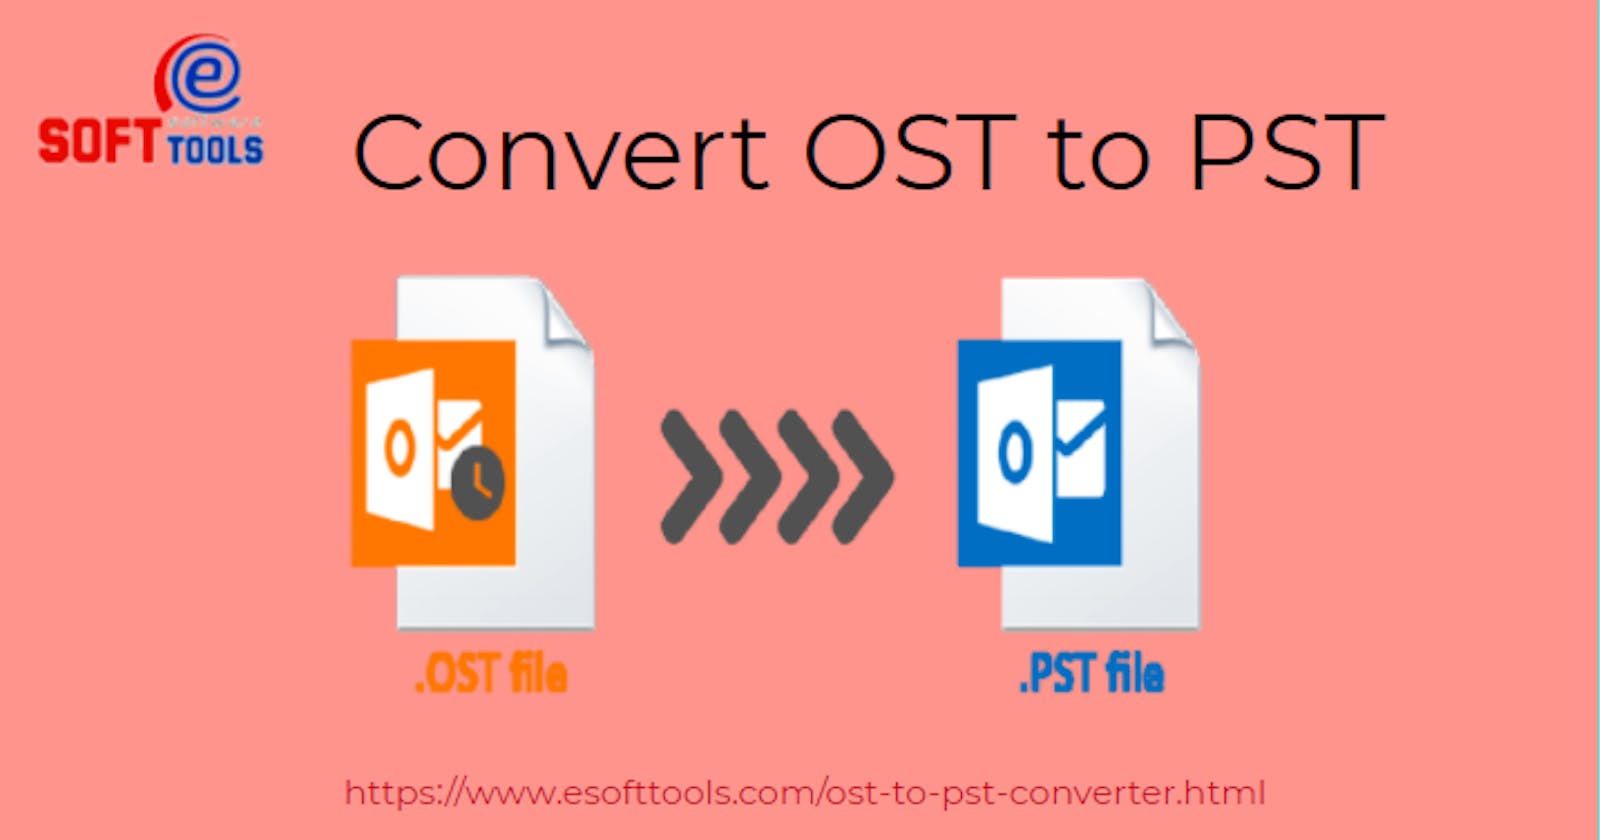 How to Convert OST to PST File?